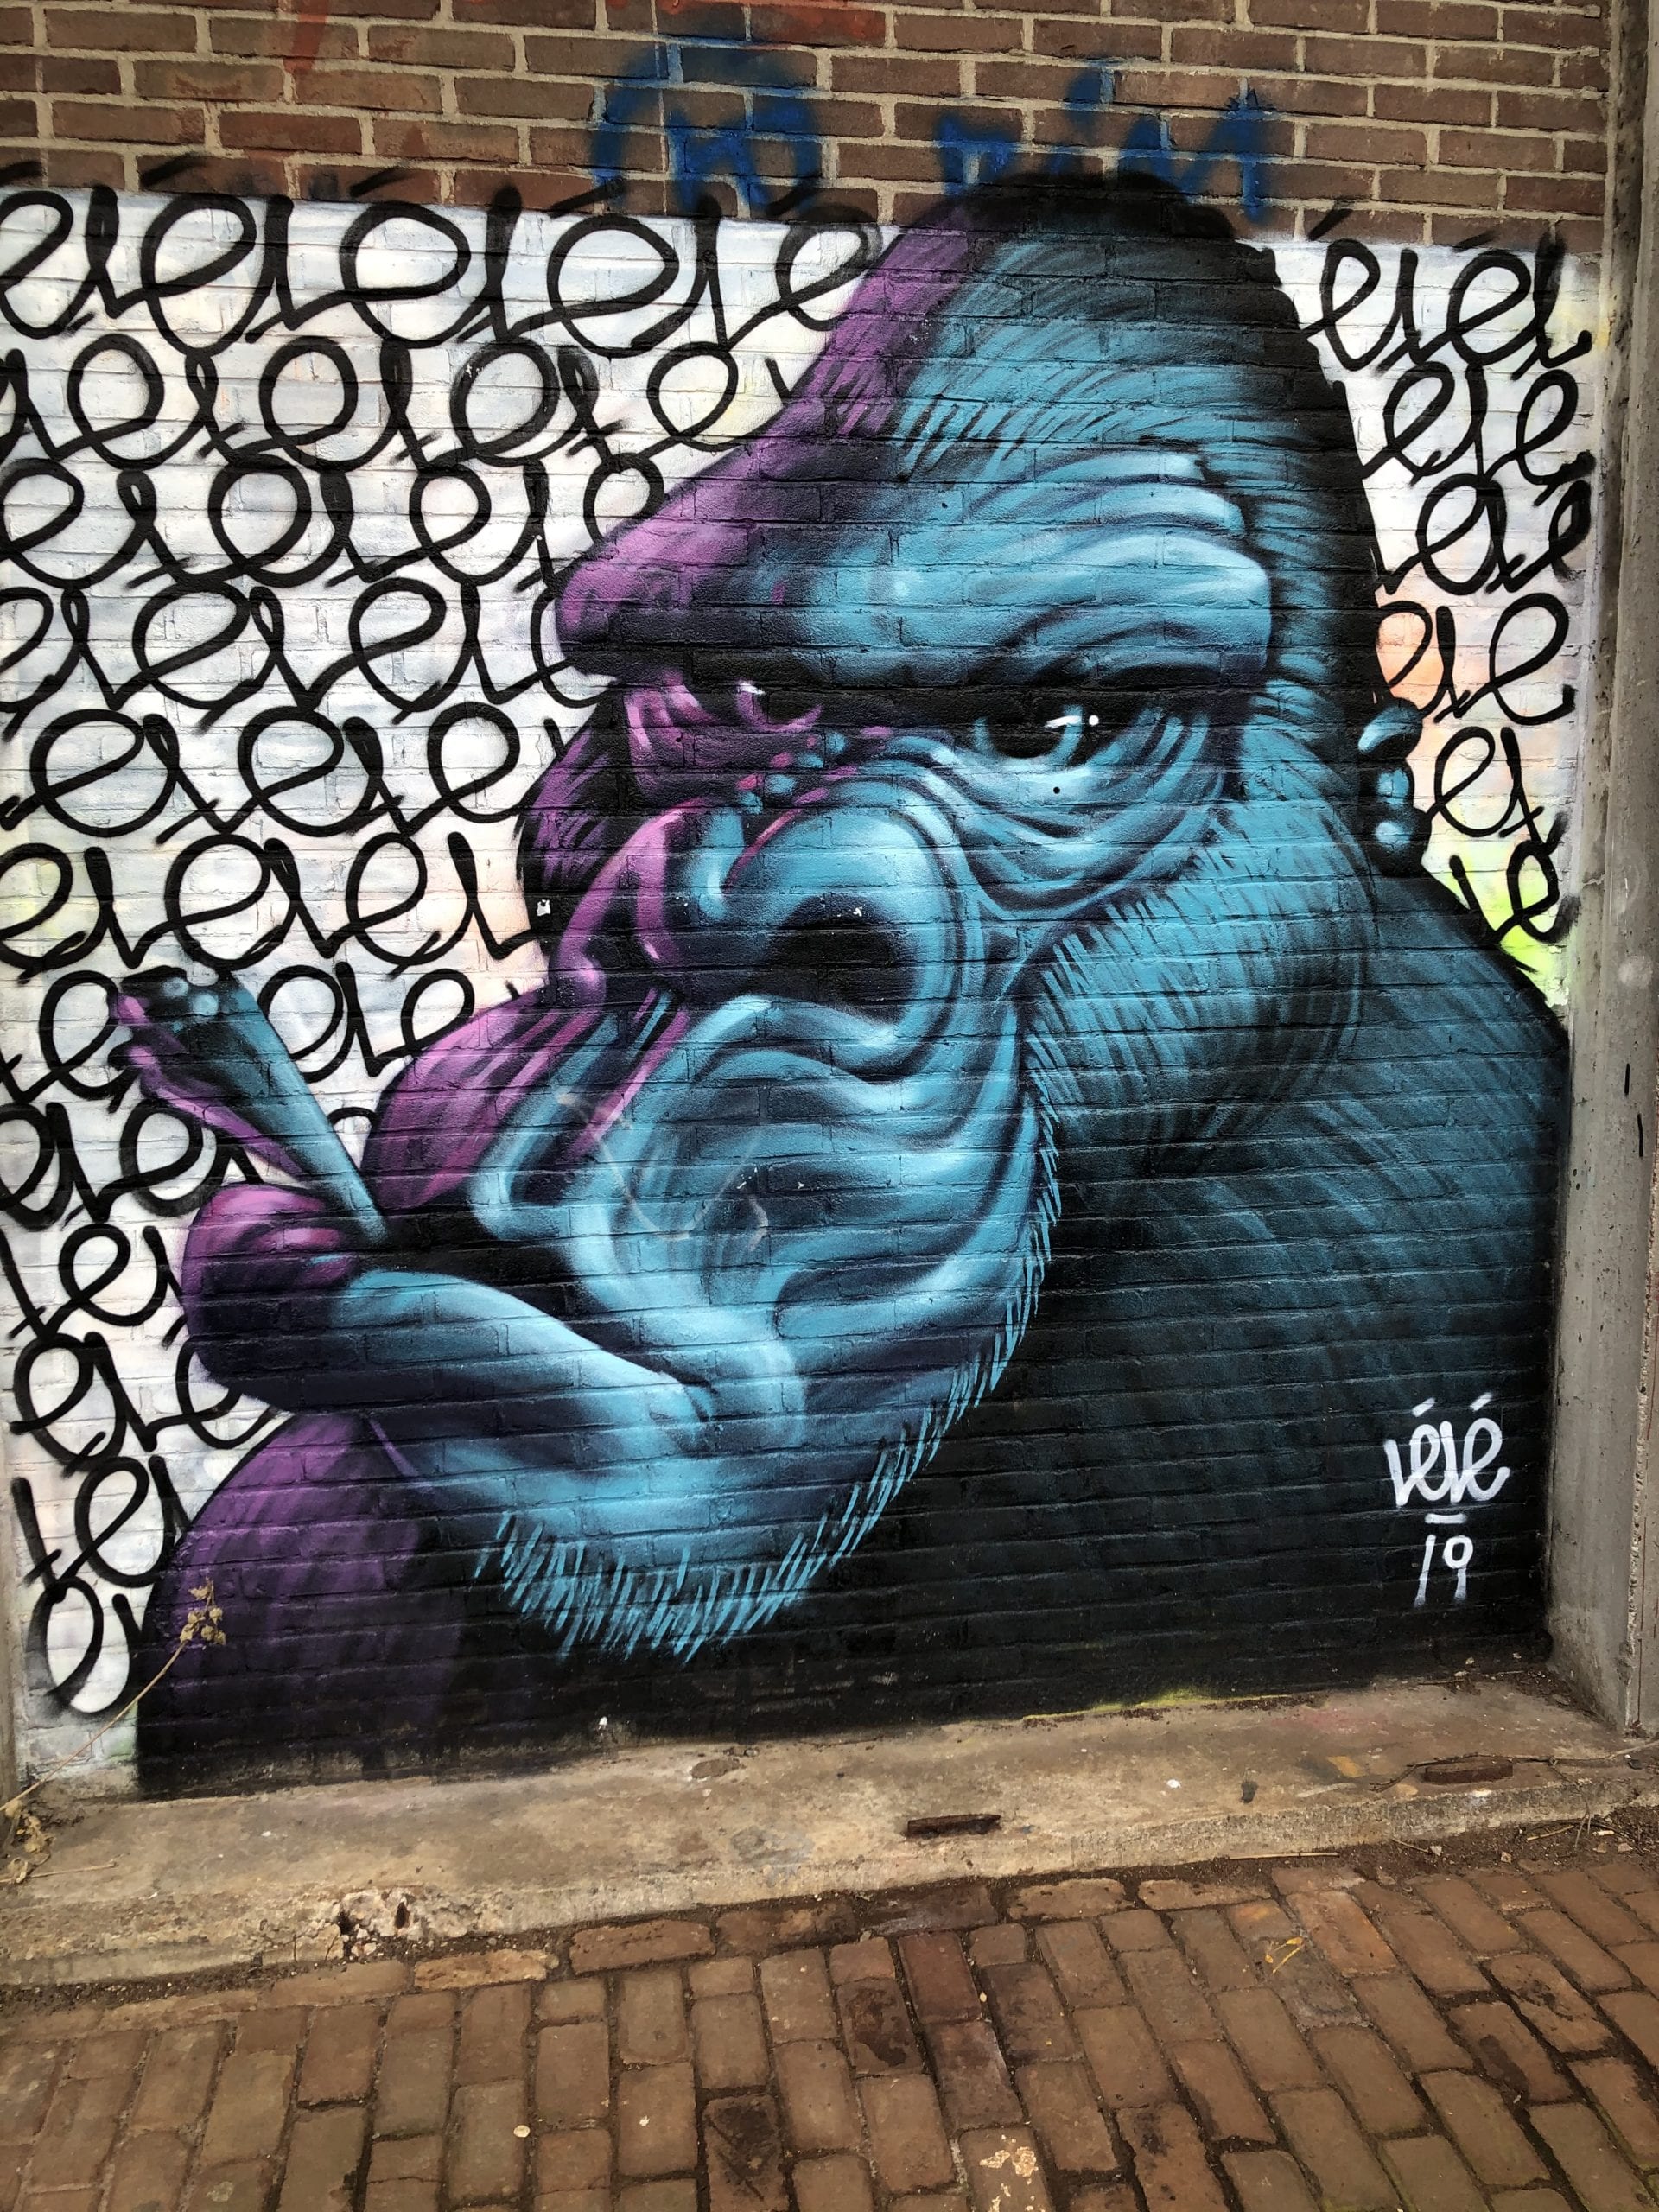 NDSM wharf graffiti mural of gorilla with a join